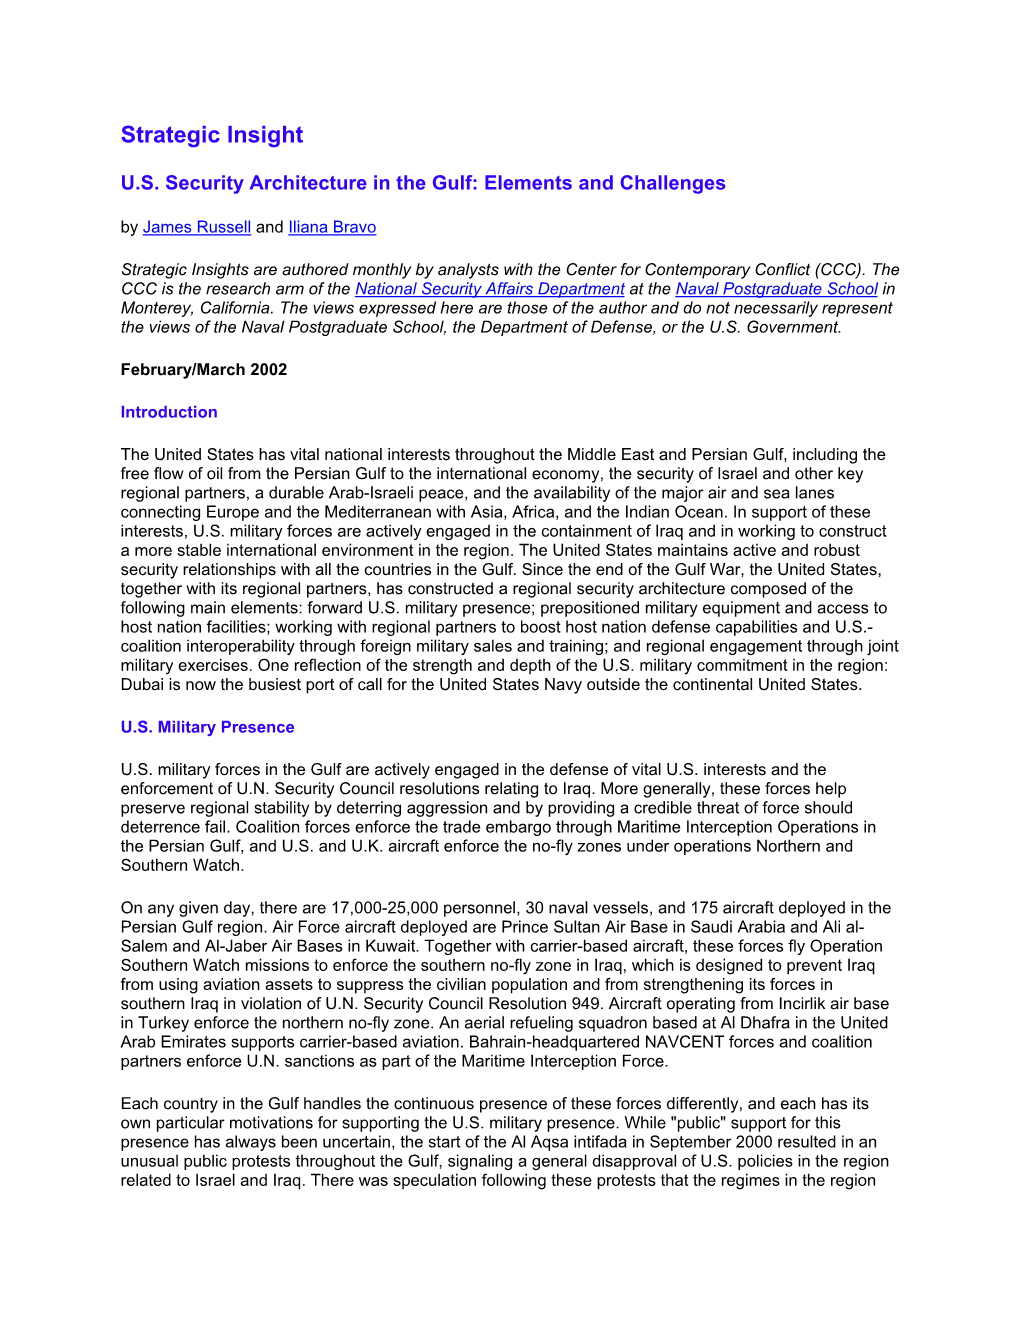 U.S. Security Architecture in the Gulf: Elements and Challenges by James Russell and Iliana Bravo